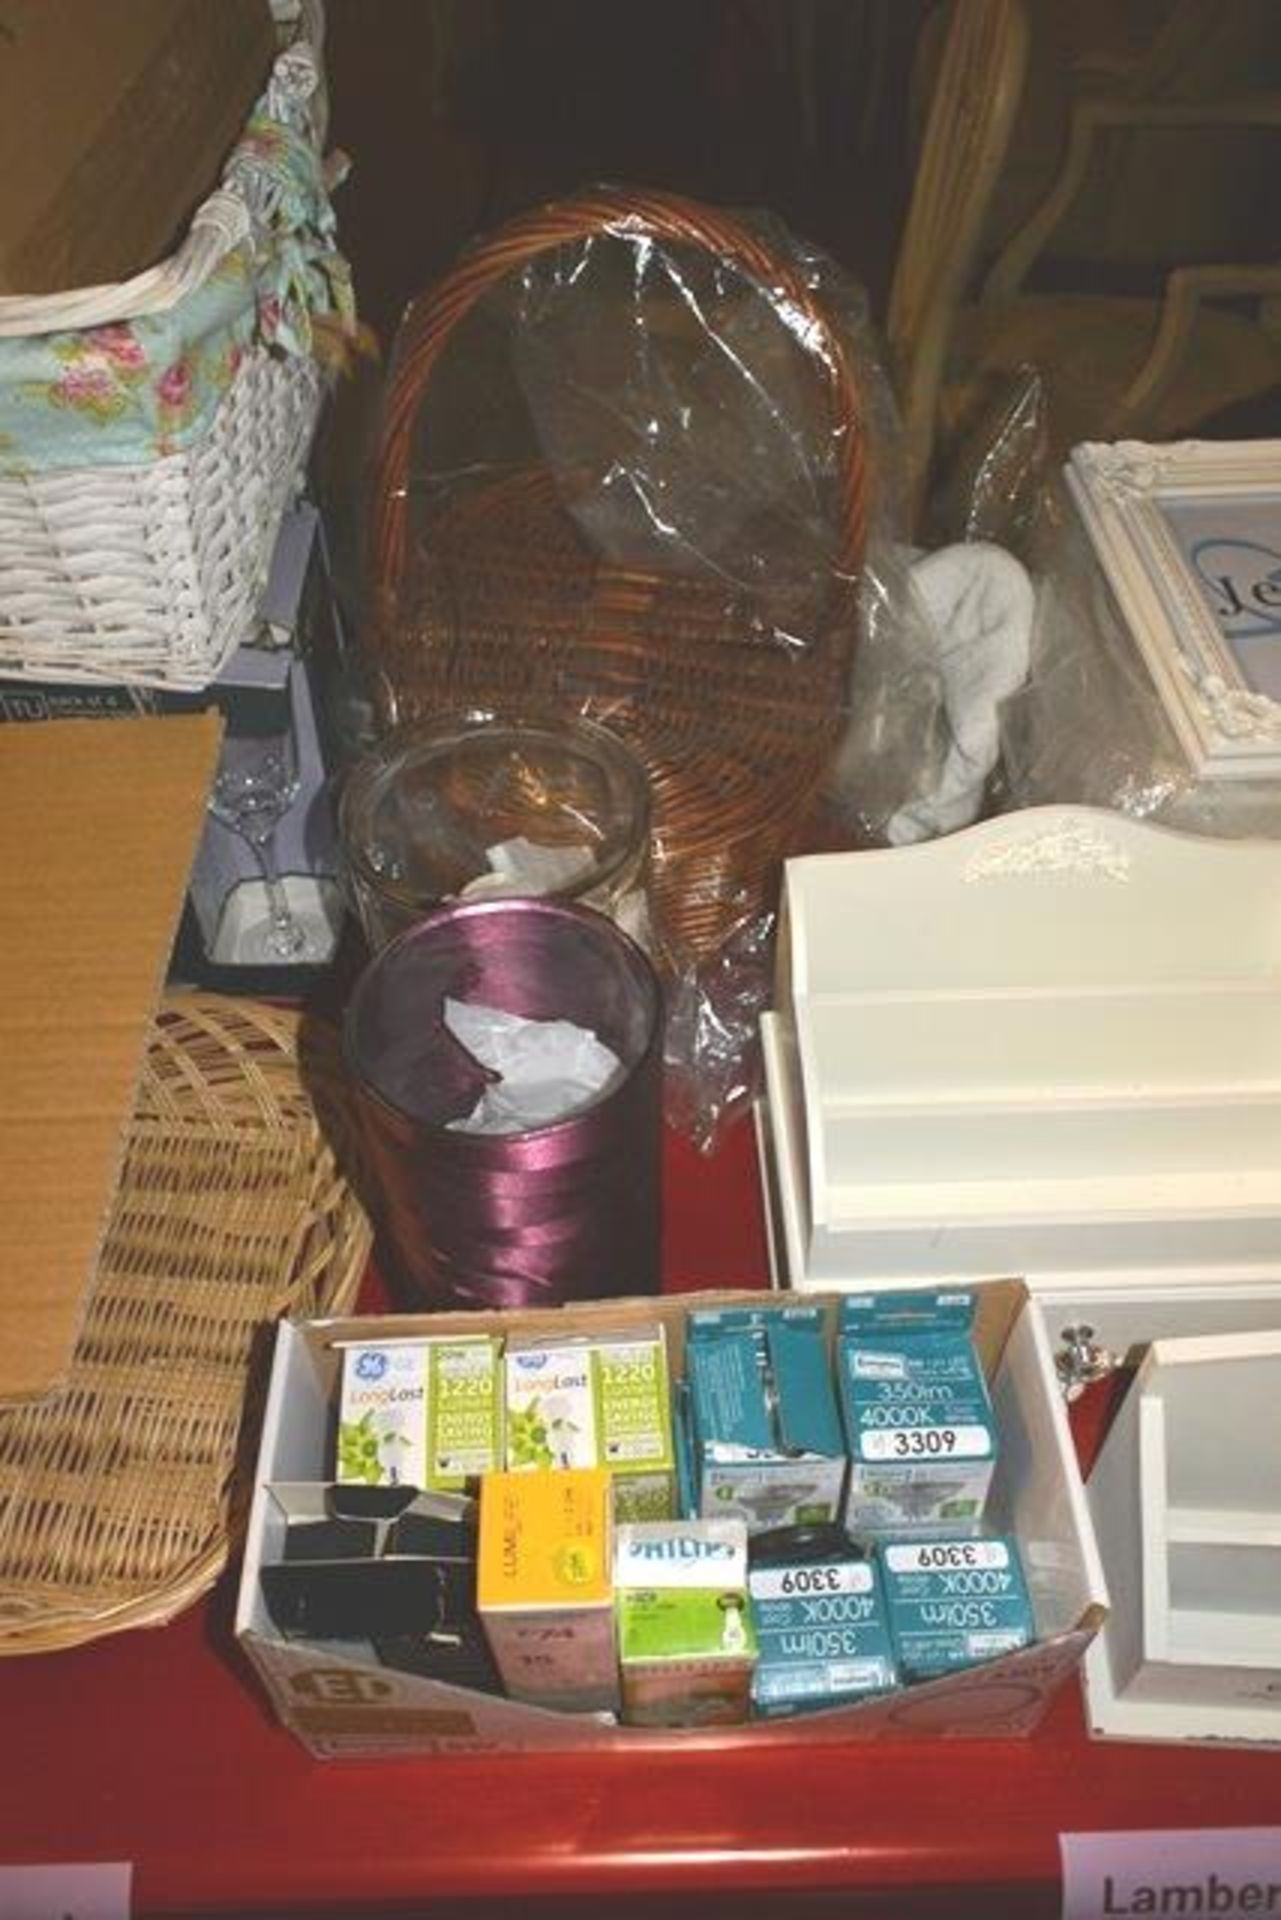 contents of table, to inc: glassware, lightbulbs, digital keypad safe, photoframes, decorations, - Image 2 of 4